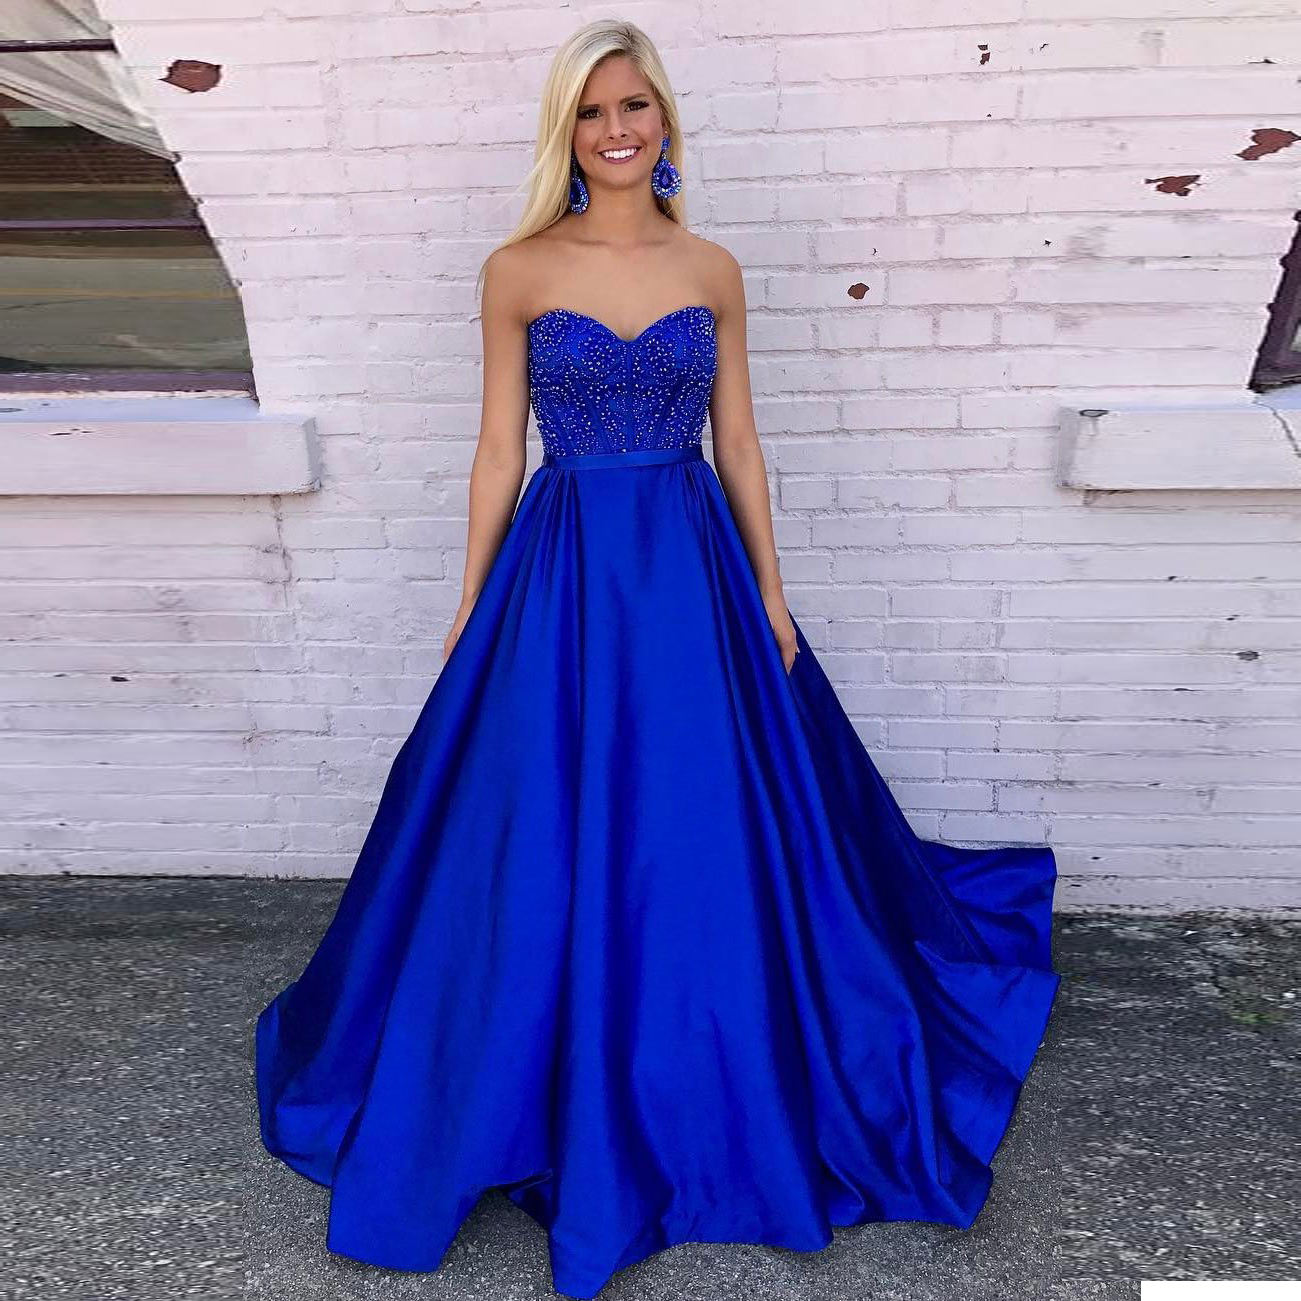 Elegant Sweetheart Royal Blue Prom Dress,A Line Formal Gown With Beaded